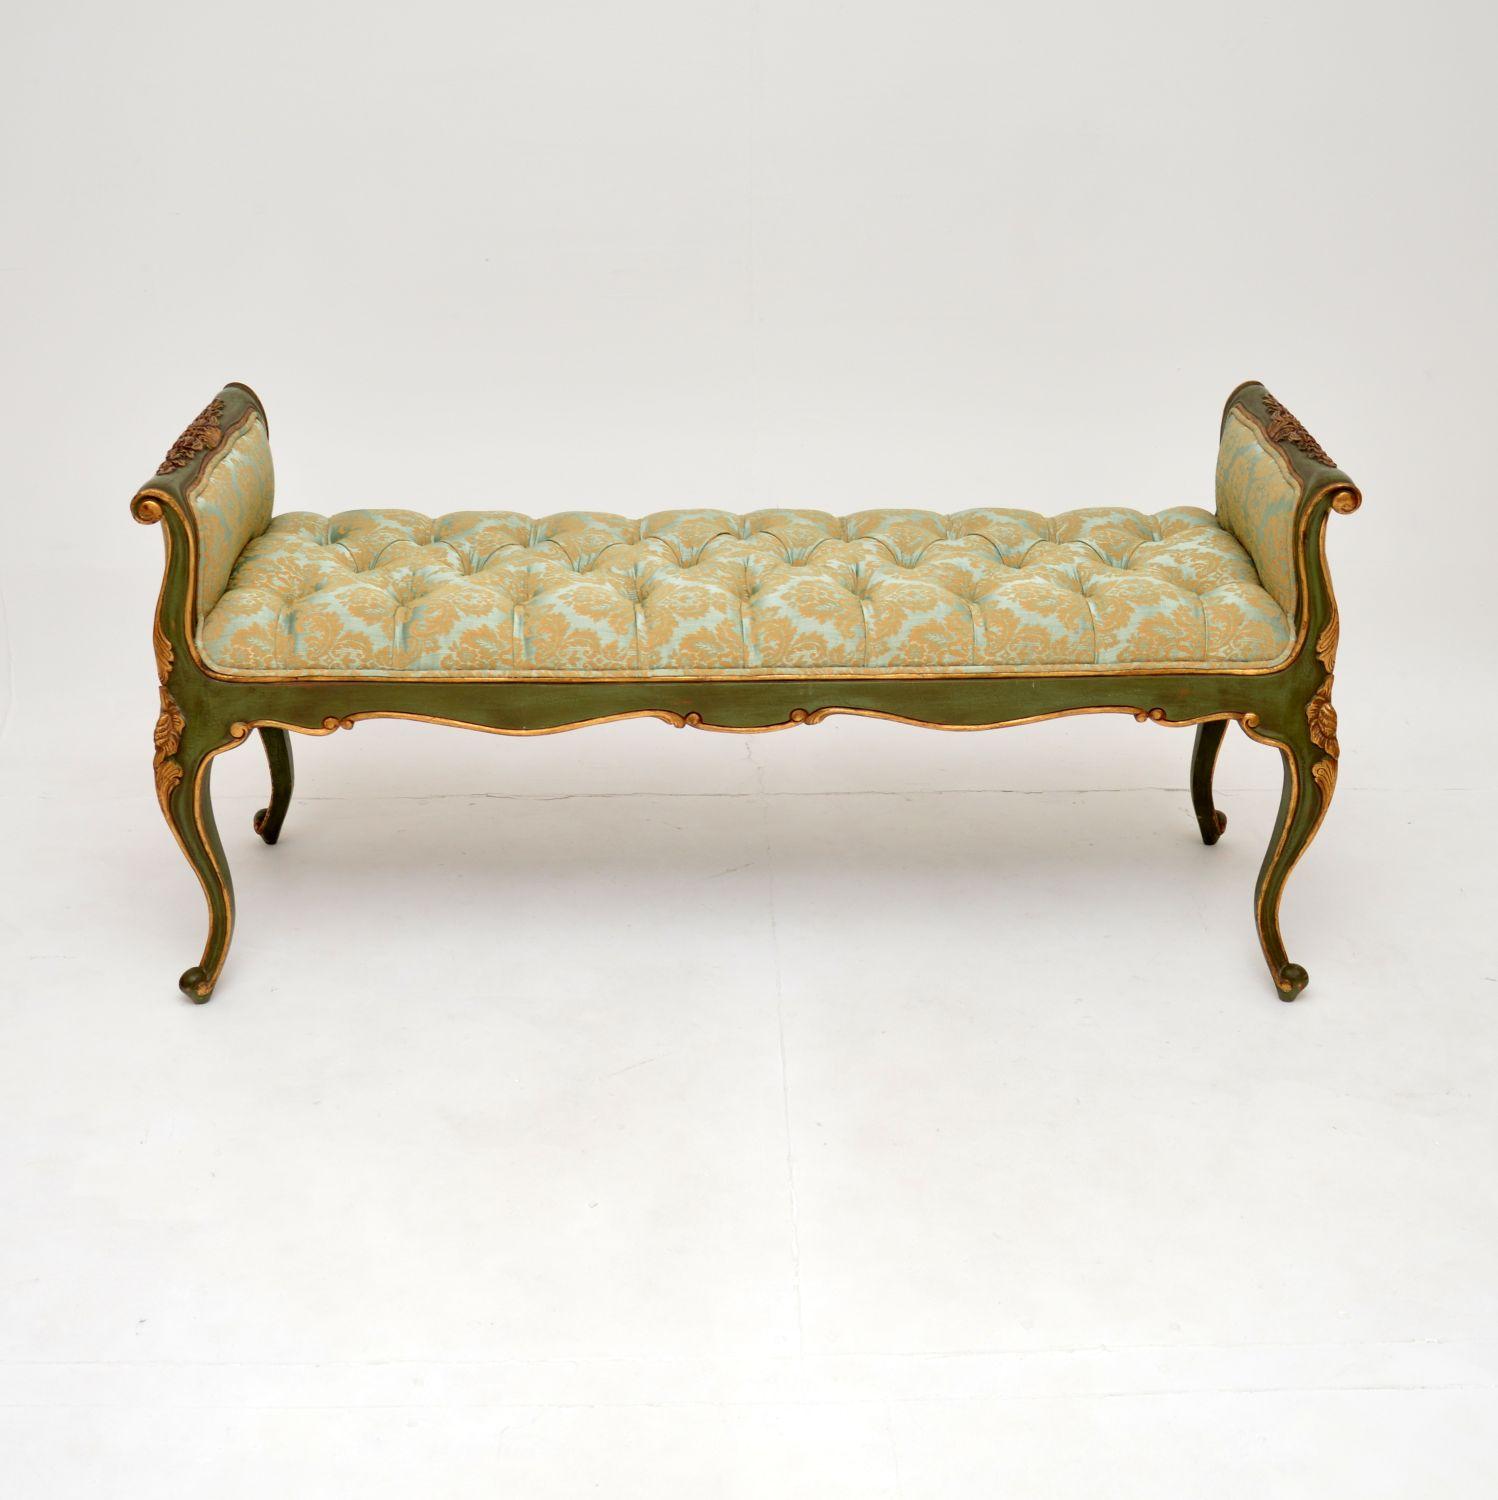 A stunning antique French gilt wood bench. We would date this to around the 1960-70’s and it’s in the classical French Louis style.

It is of superb quality and is a great size. The frame is beautifully carved, and is finished with a light green